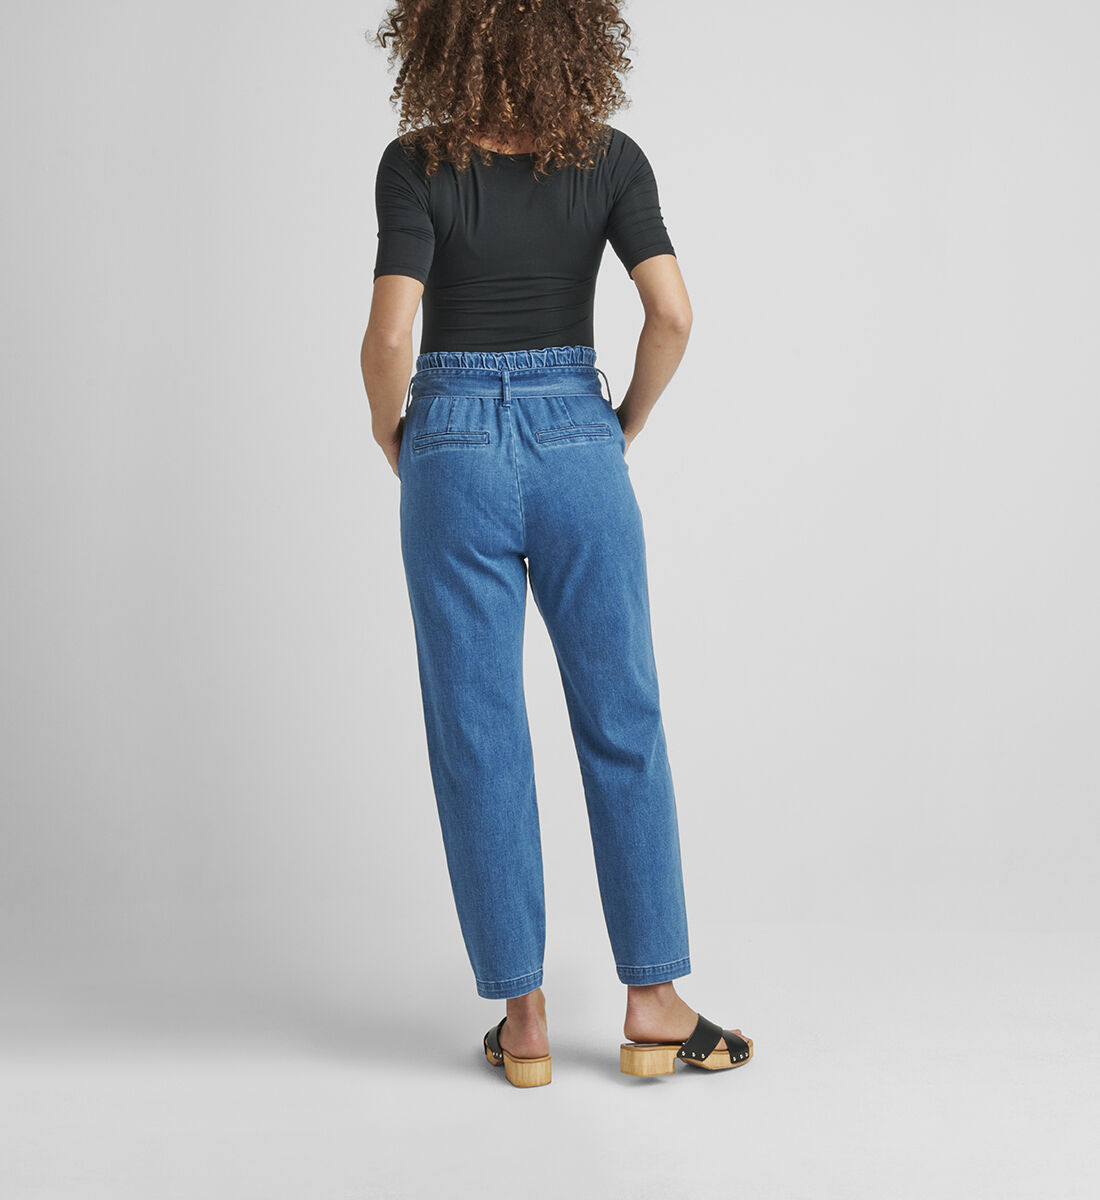 Belted Pleat High Rise Tapered Leg Pant Back